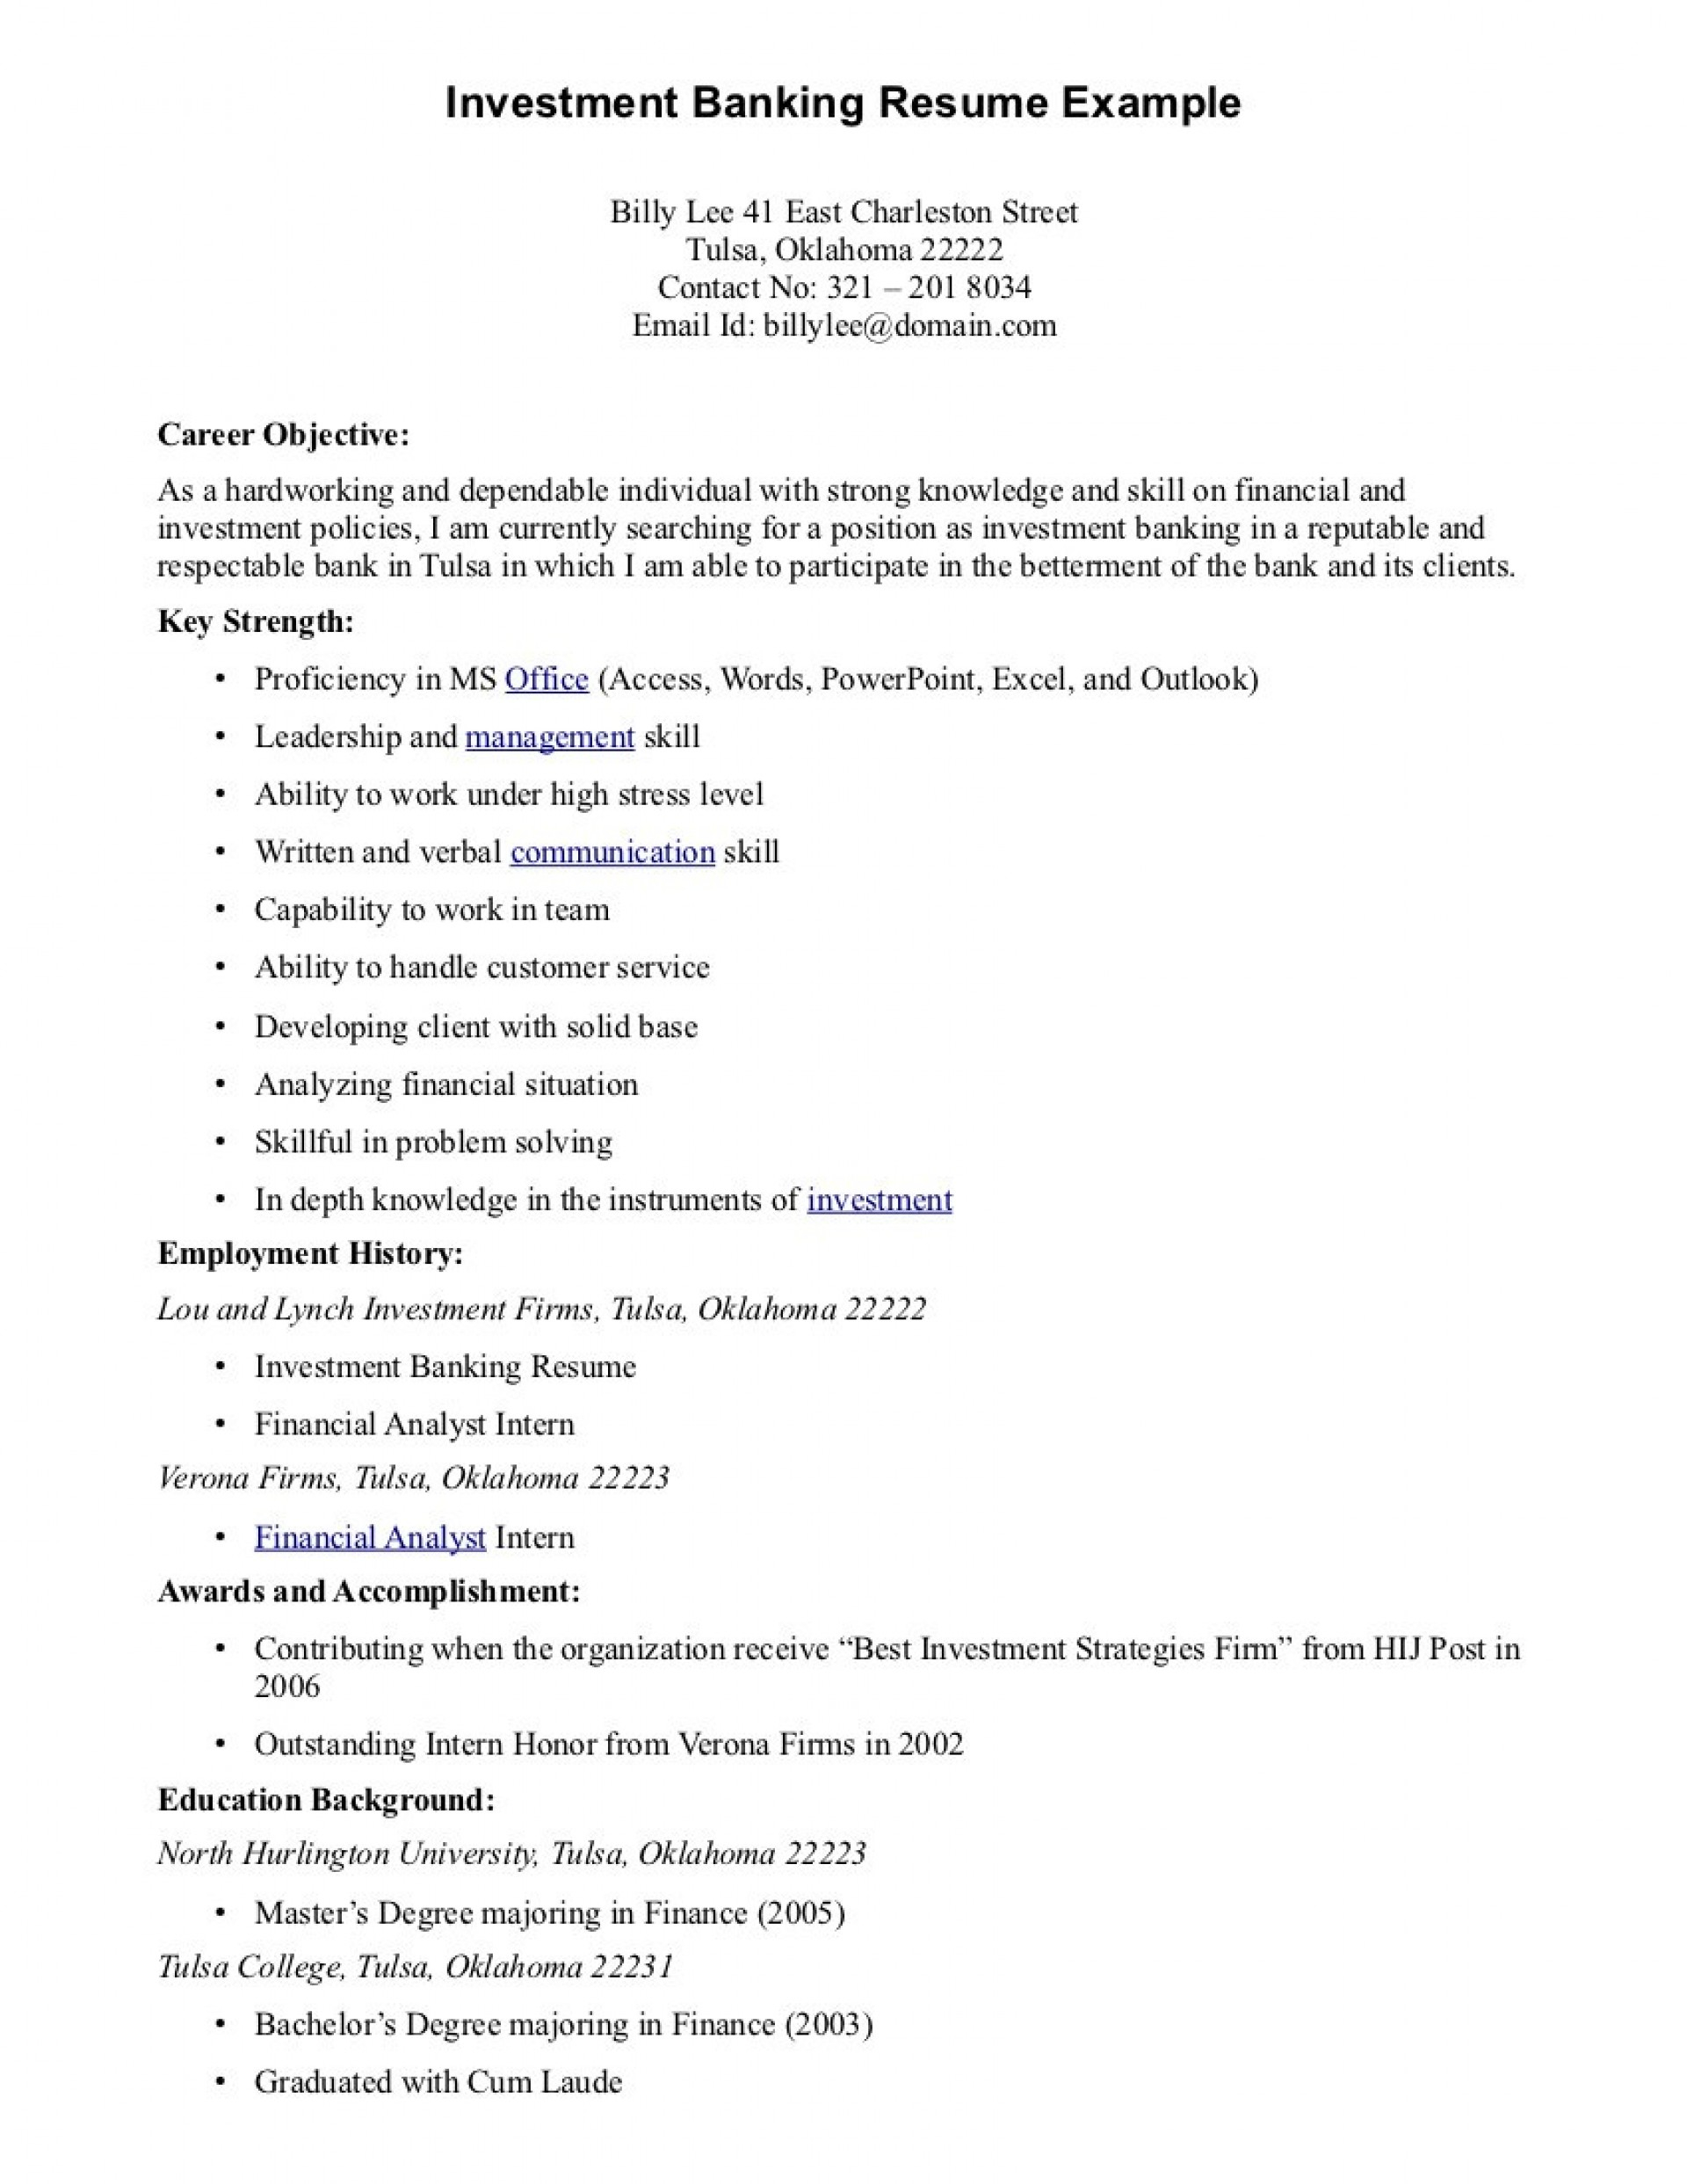 Resume Tips Objective Objectives For Resume Examples Floating City